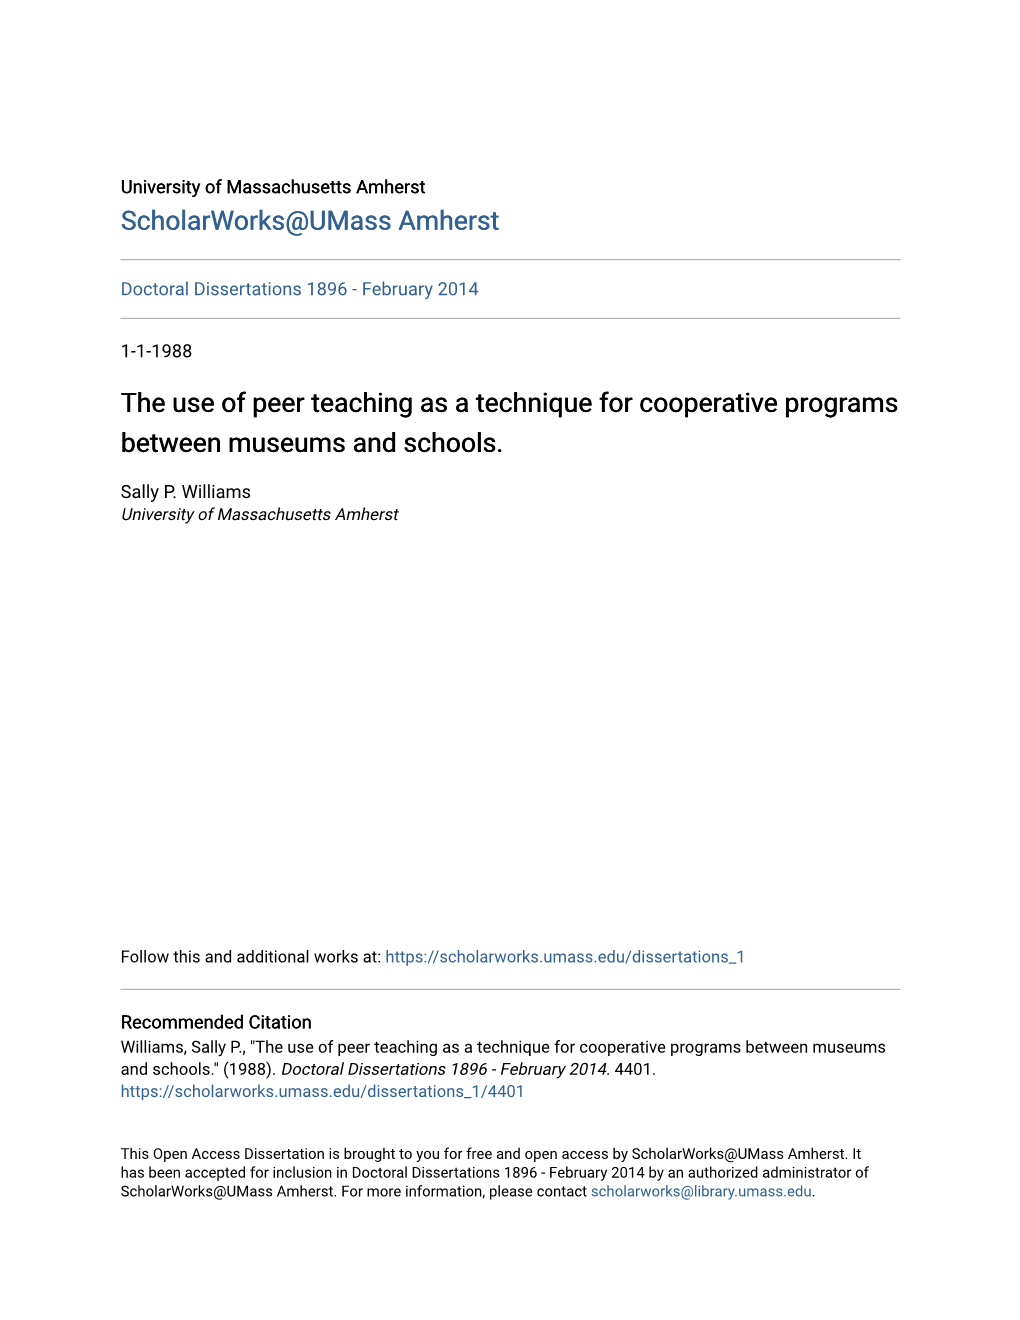 The Use of Peer Teaching As a Technique for Cooperative Programs Between Museums and Schools